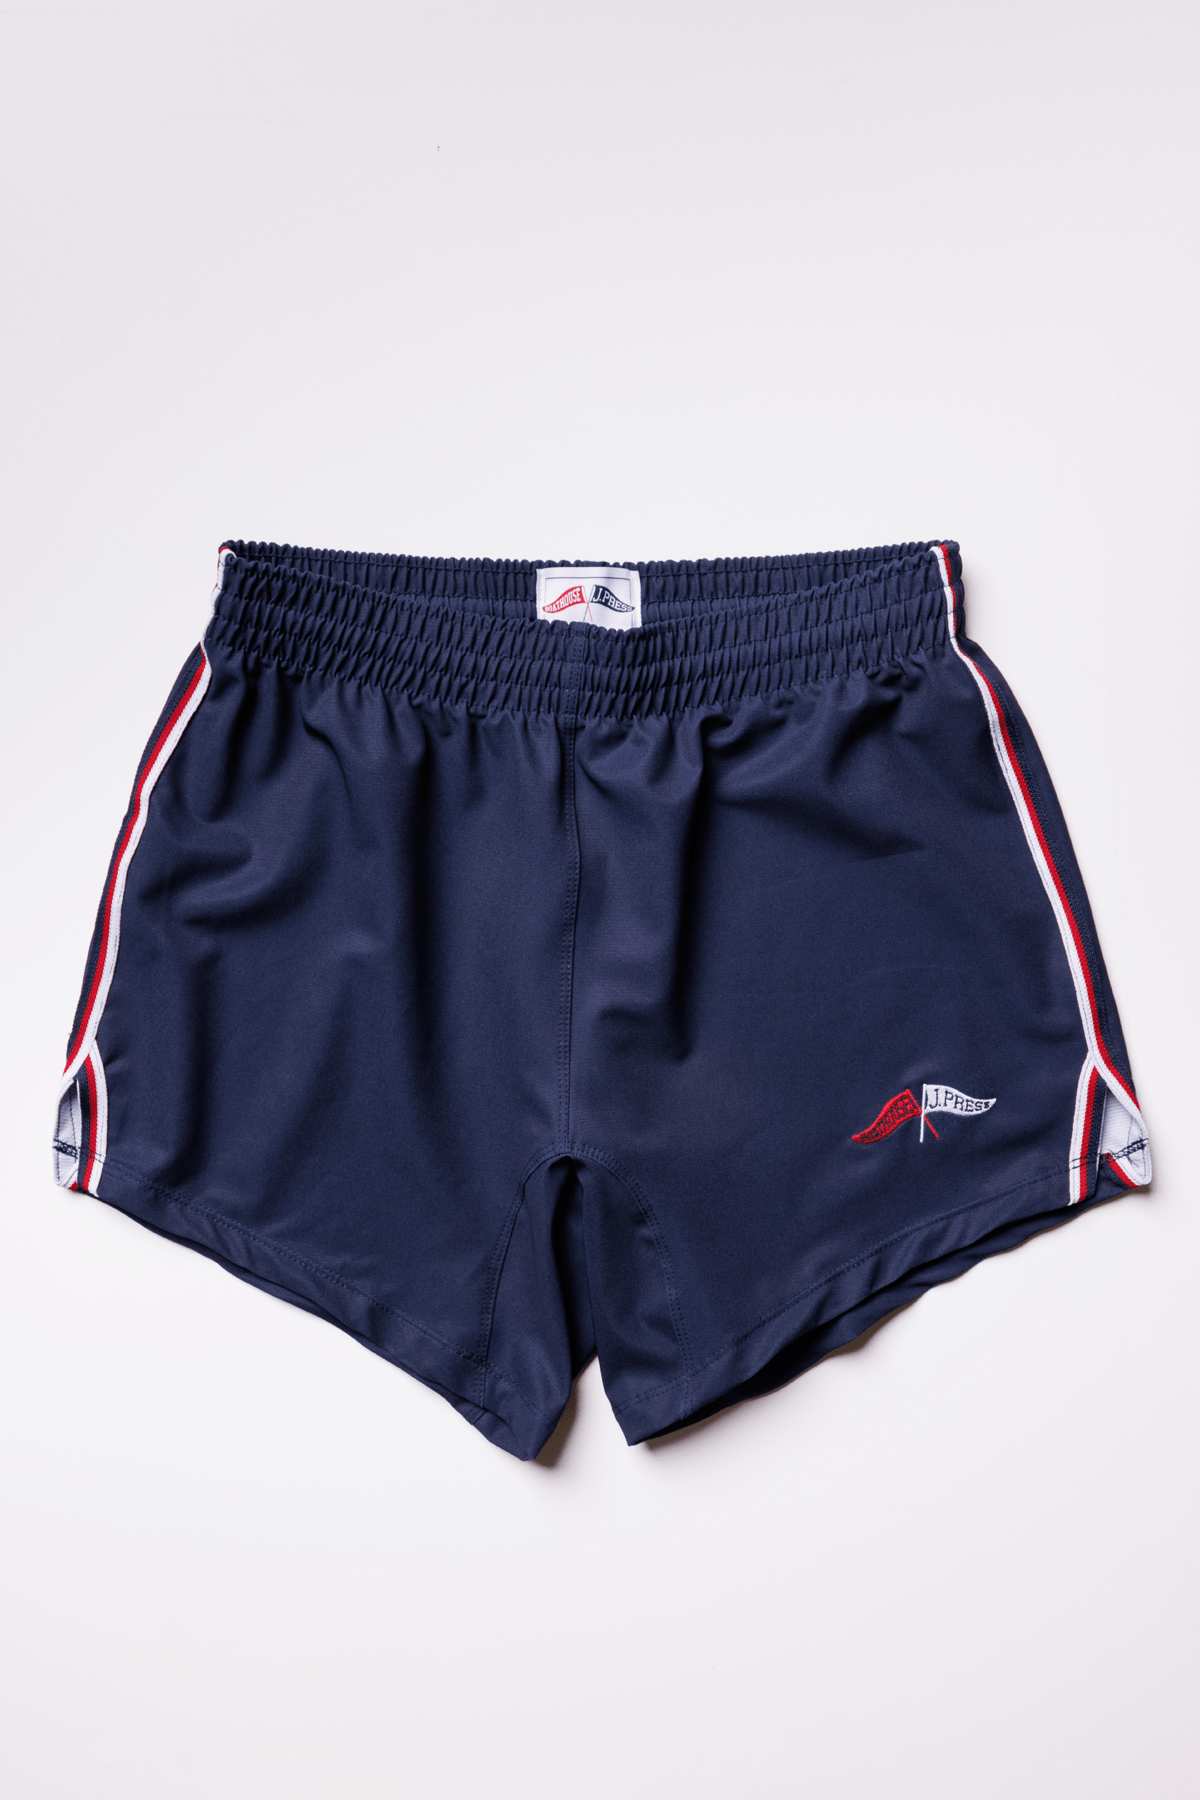 BOATHOUSE x J.Press Rugby Unisex Shorts Navy / X-Small